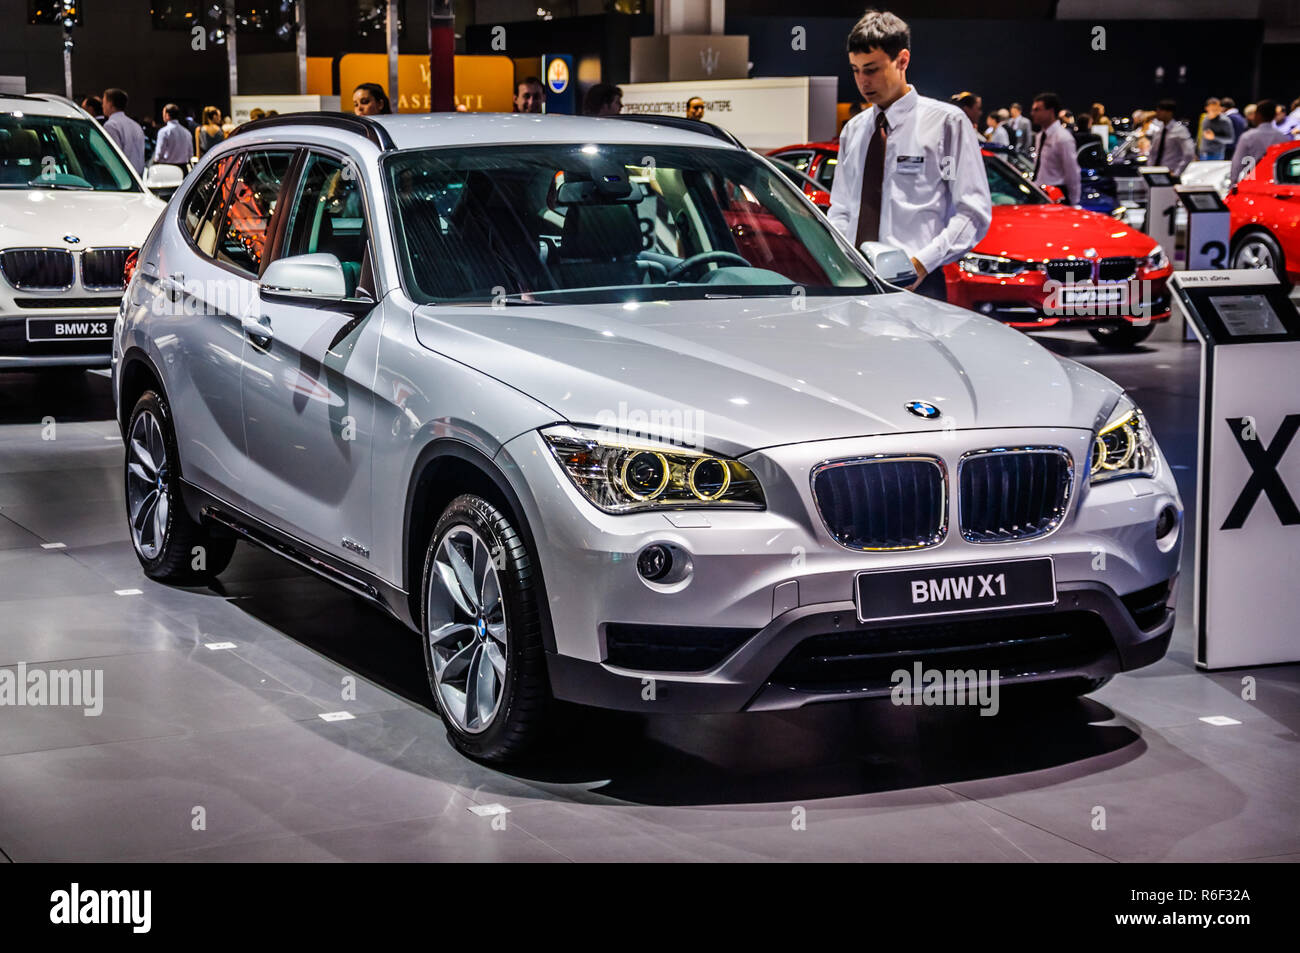 MOSCOW, RUSSIA - AUG 2012: BMW X1 E84 presented as world premiere at the  16th MIAS (Moscow International Automobile Salon) on August 30, 2012 in  Mosco Stock Photo - Alamy